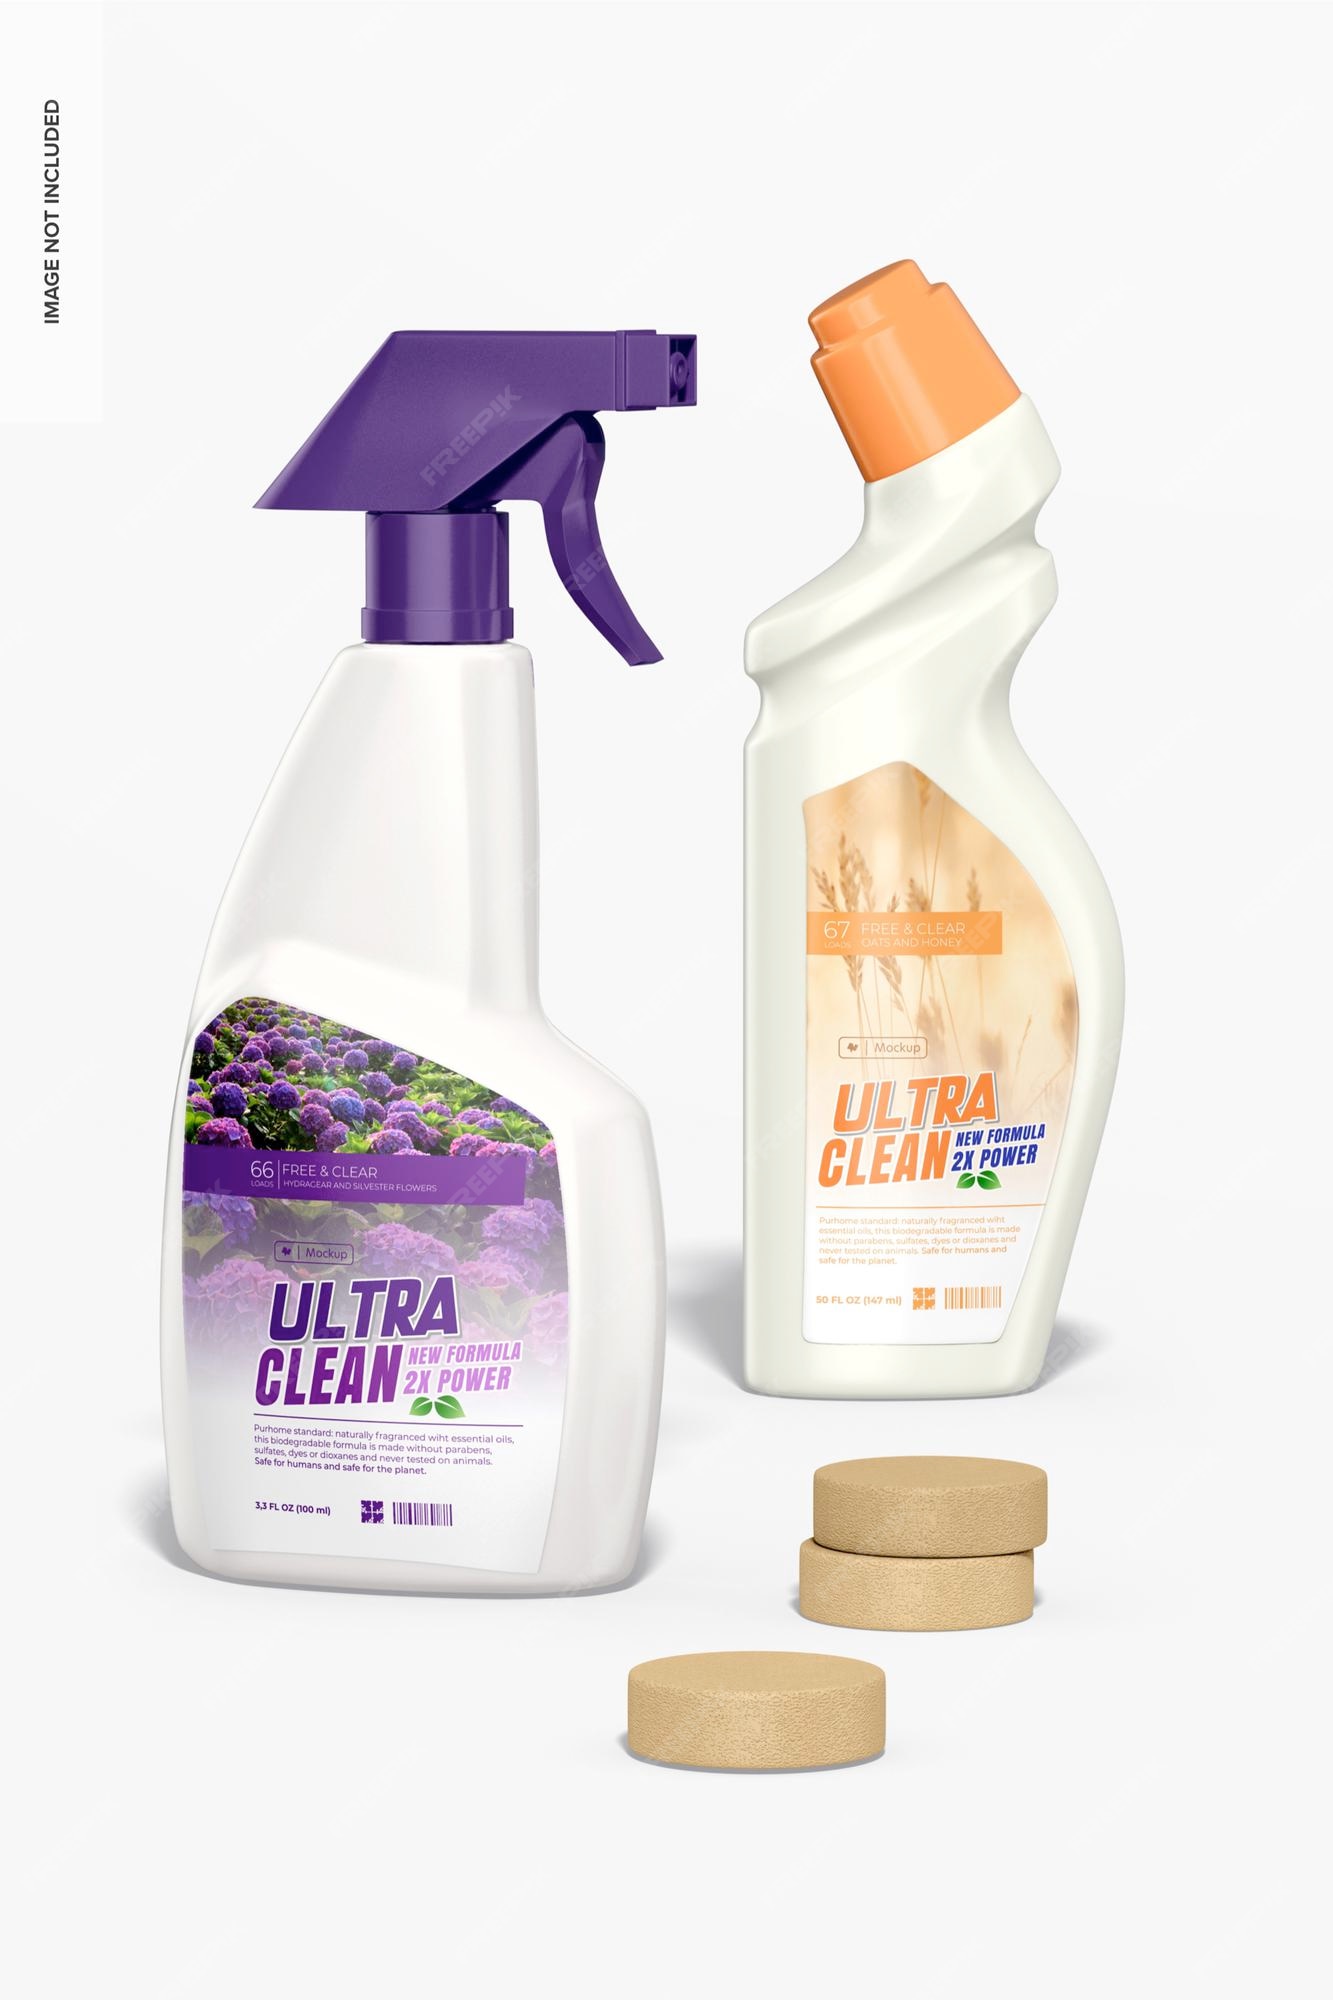 Premium PSD | Cleaning products scene mockup